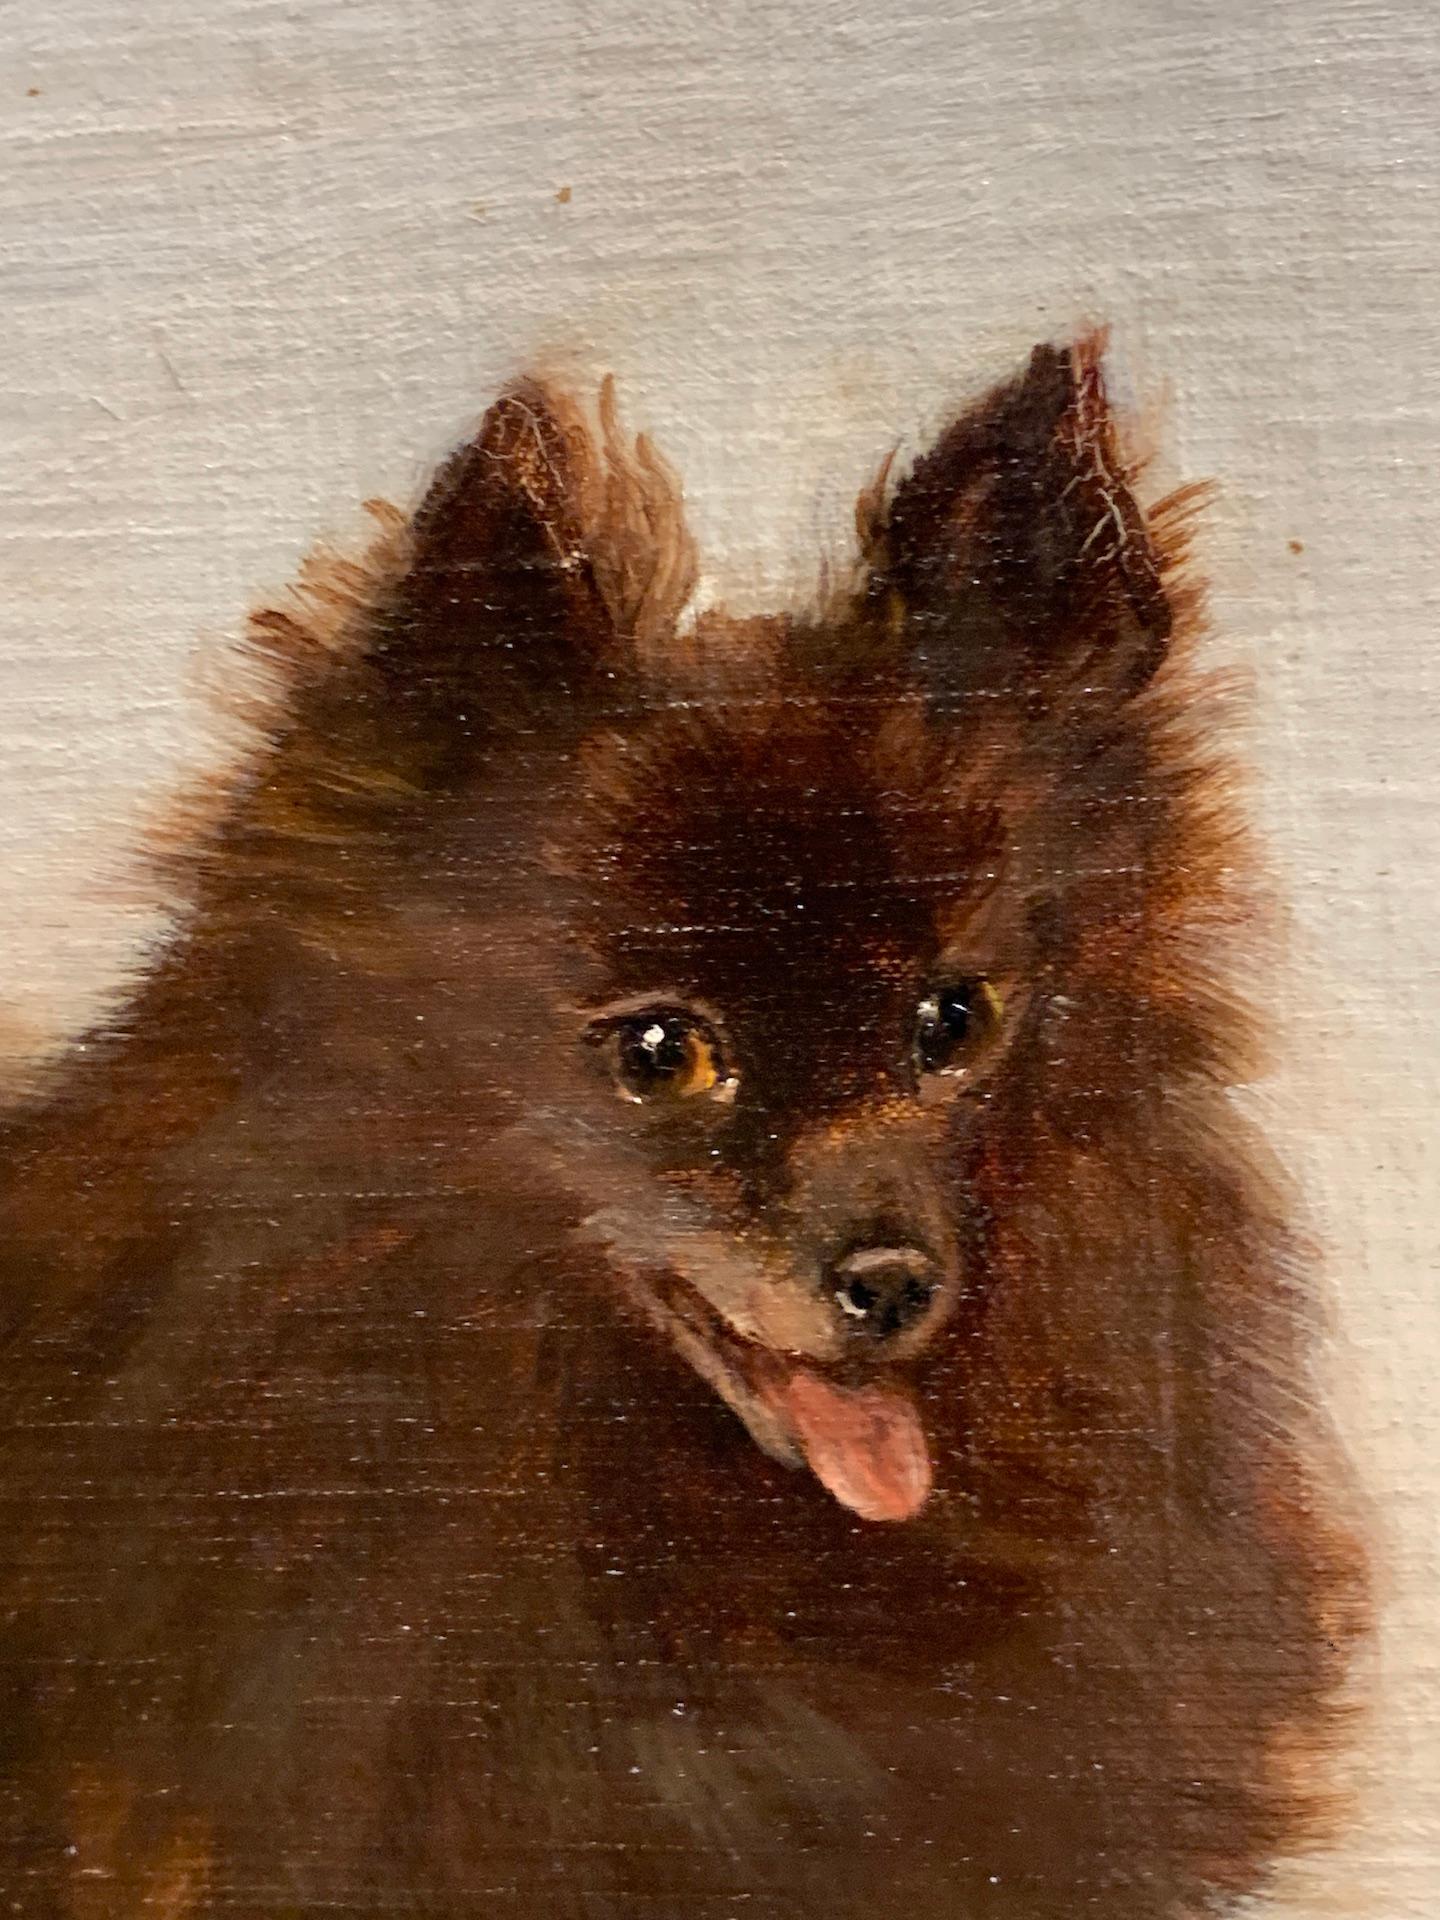 Margret Cornish

English painter of animal and dog subjects, Signed lower left and inscribed on the reverse.

Wonderful and very well painted portrait of a 'Best Friend', as titled on the reverse.

The artist was active from the late 19th century